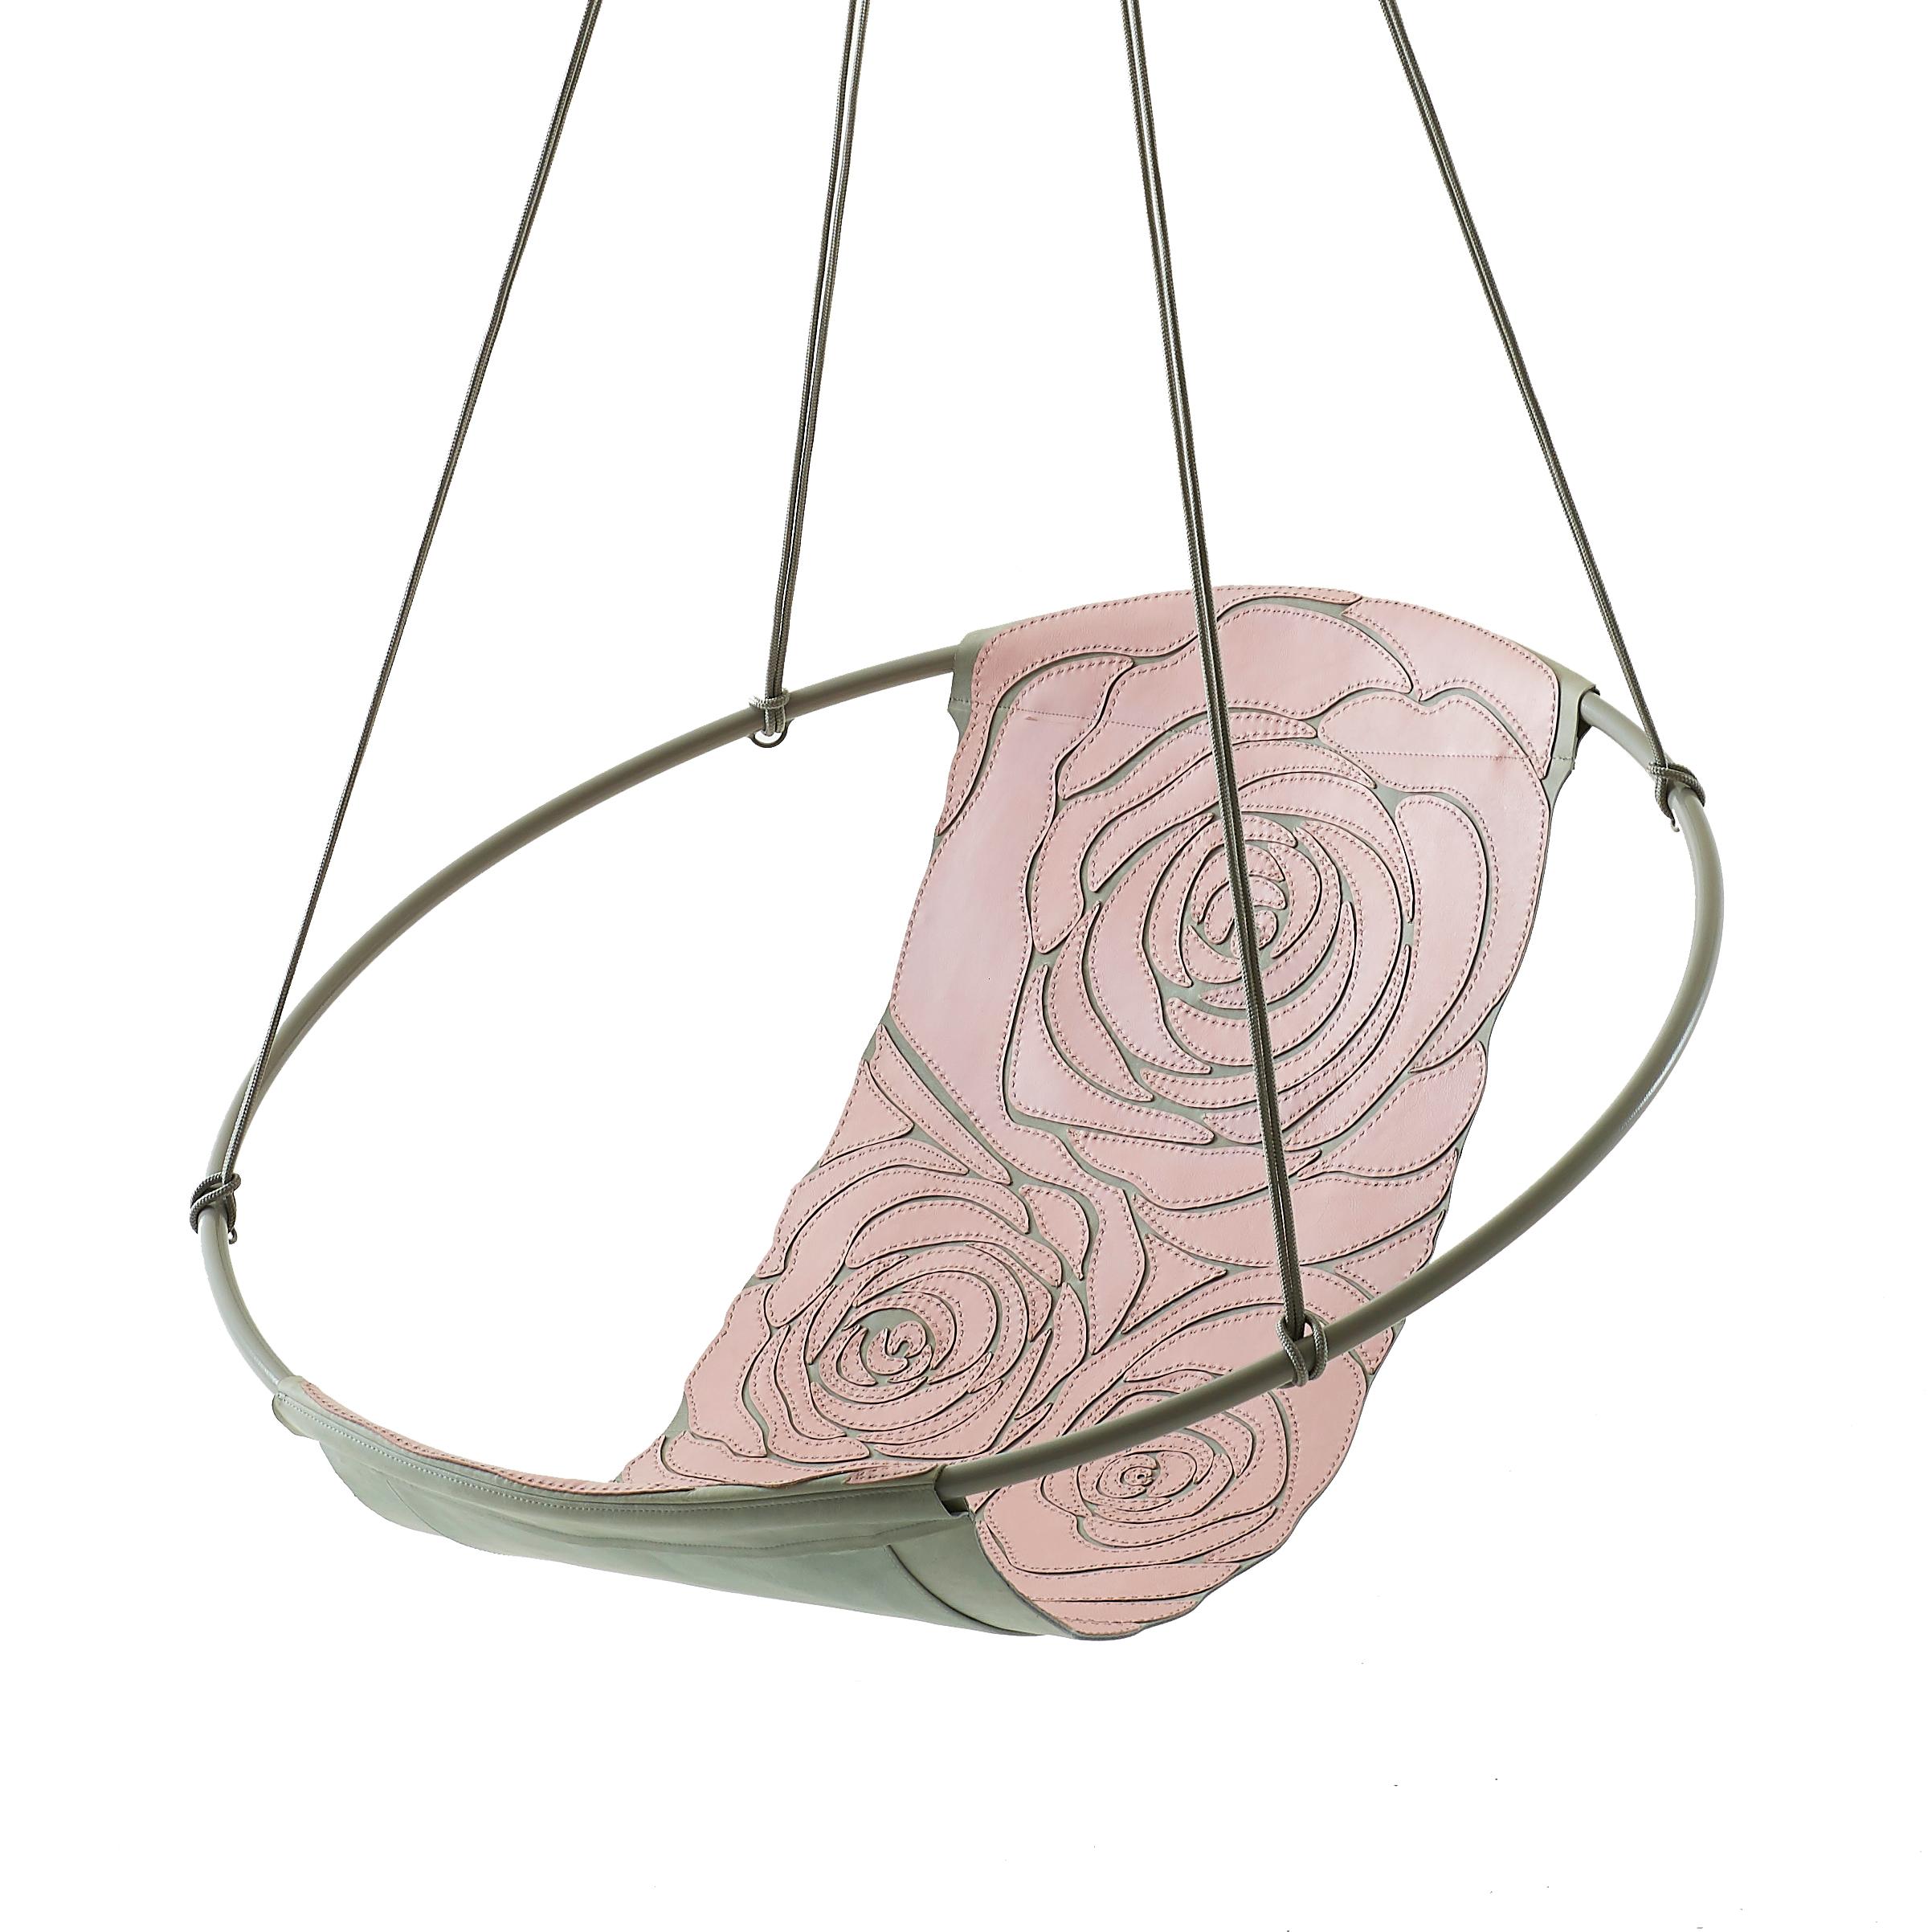 Stripped away from all excess, this hanging chair has a circular frame with the sheets of leather or fabric hanging loose within it, to create a sleek, sexy, and oh so comfortable experience. This chair’s clean lines and lightness makes it a perfect